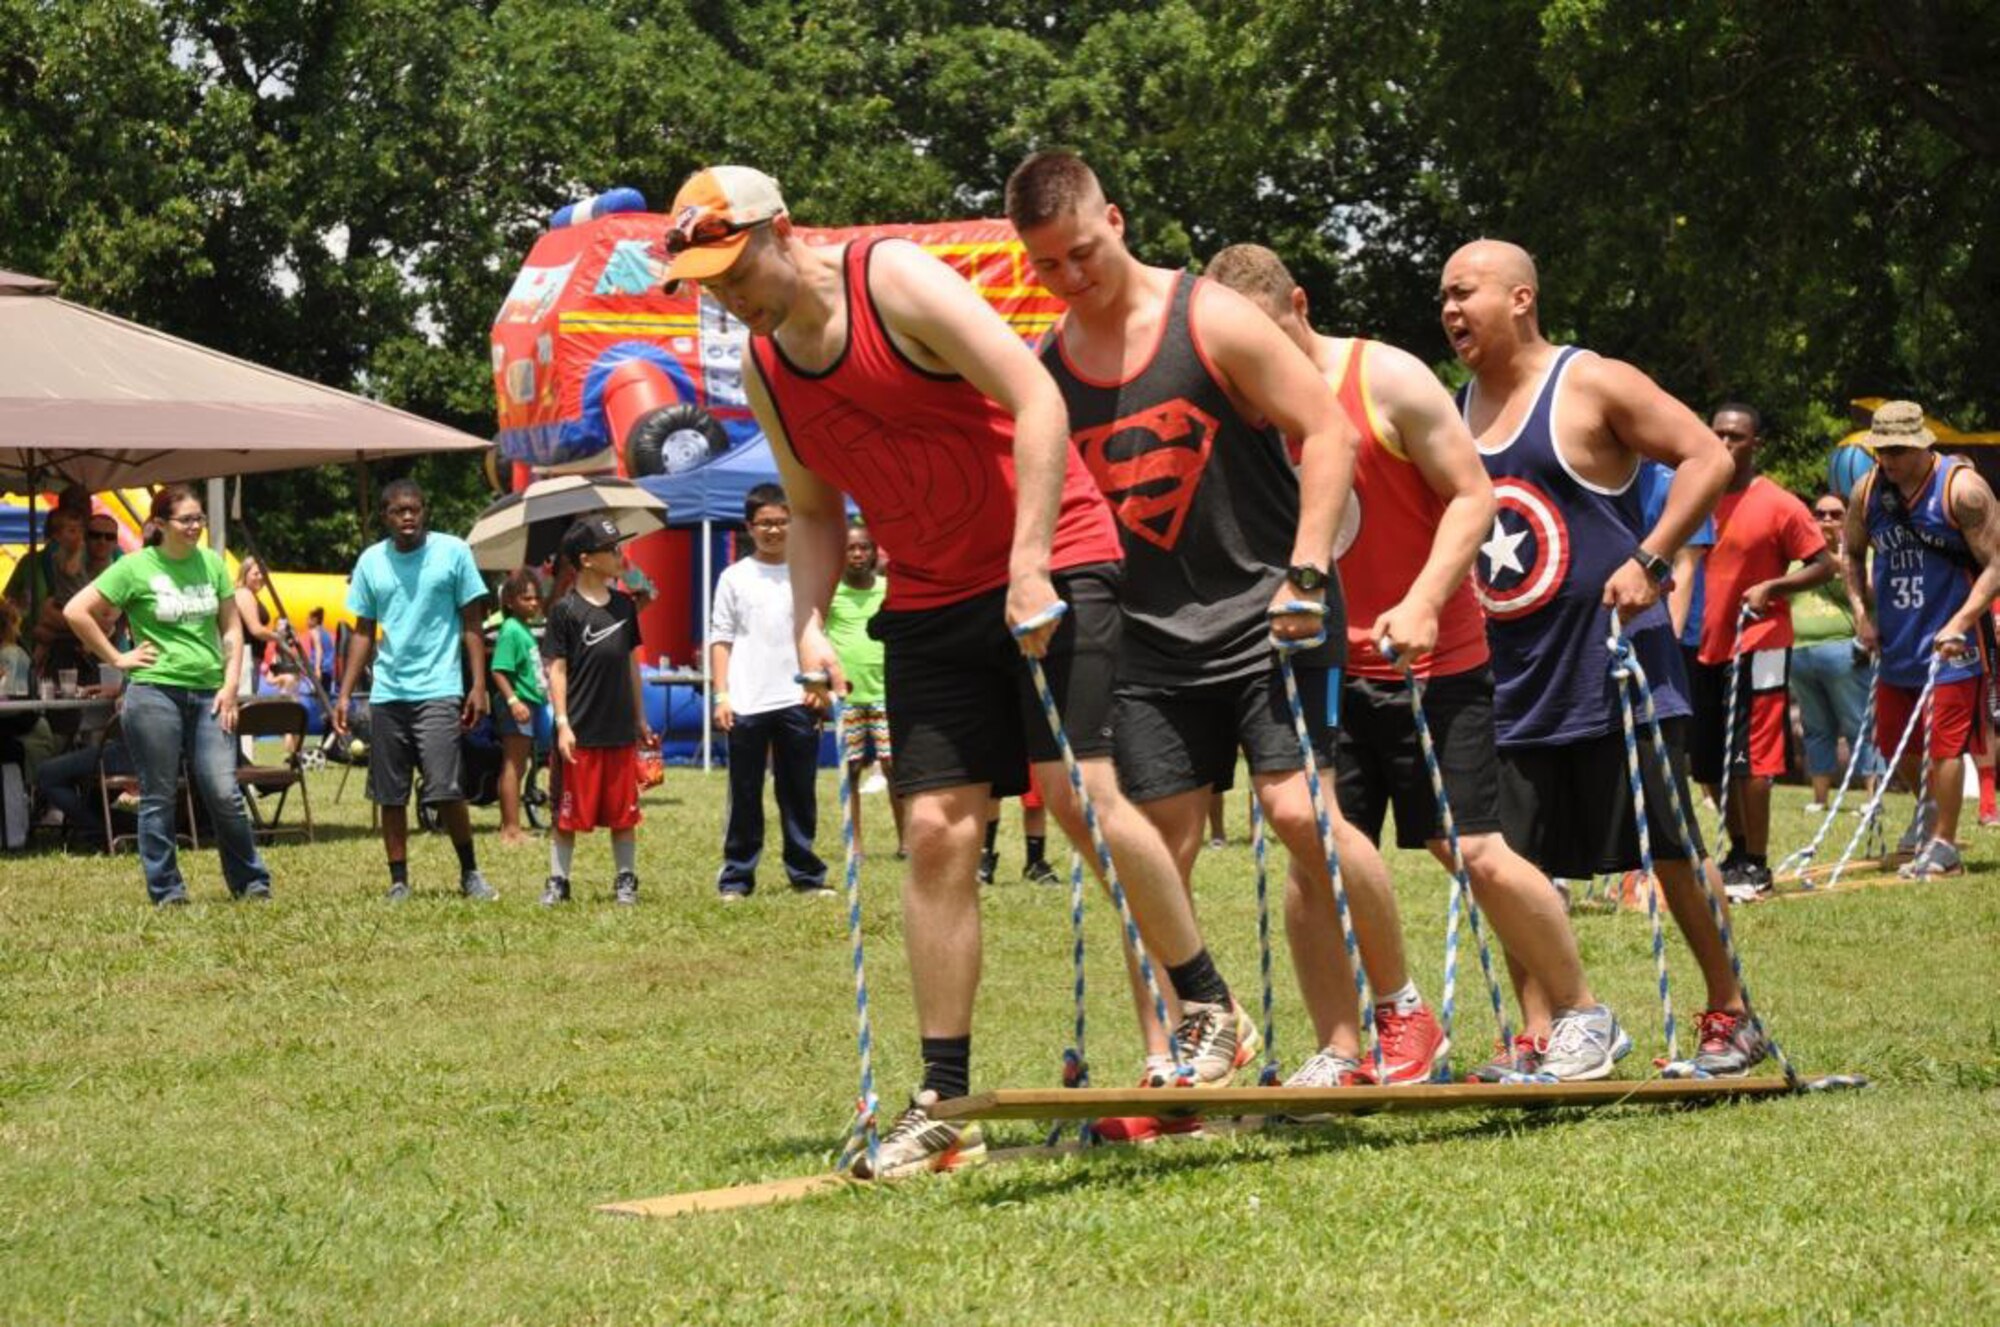 The Superfriends walk the plank all the way to the Wacky Olympics Championship. During Summer Bash June 4, competitors participated in the Olympics, which featured events such as a pie eating contest, Inflato boxing and bubble soccer. (Courtesy photo/Released)